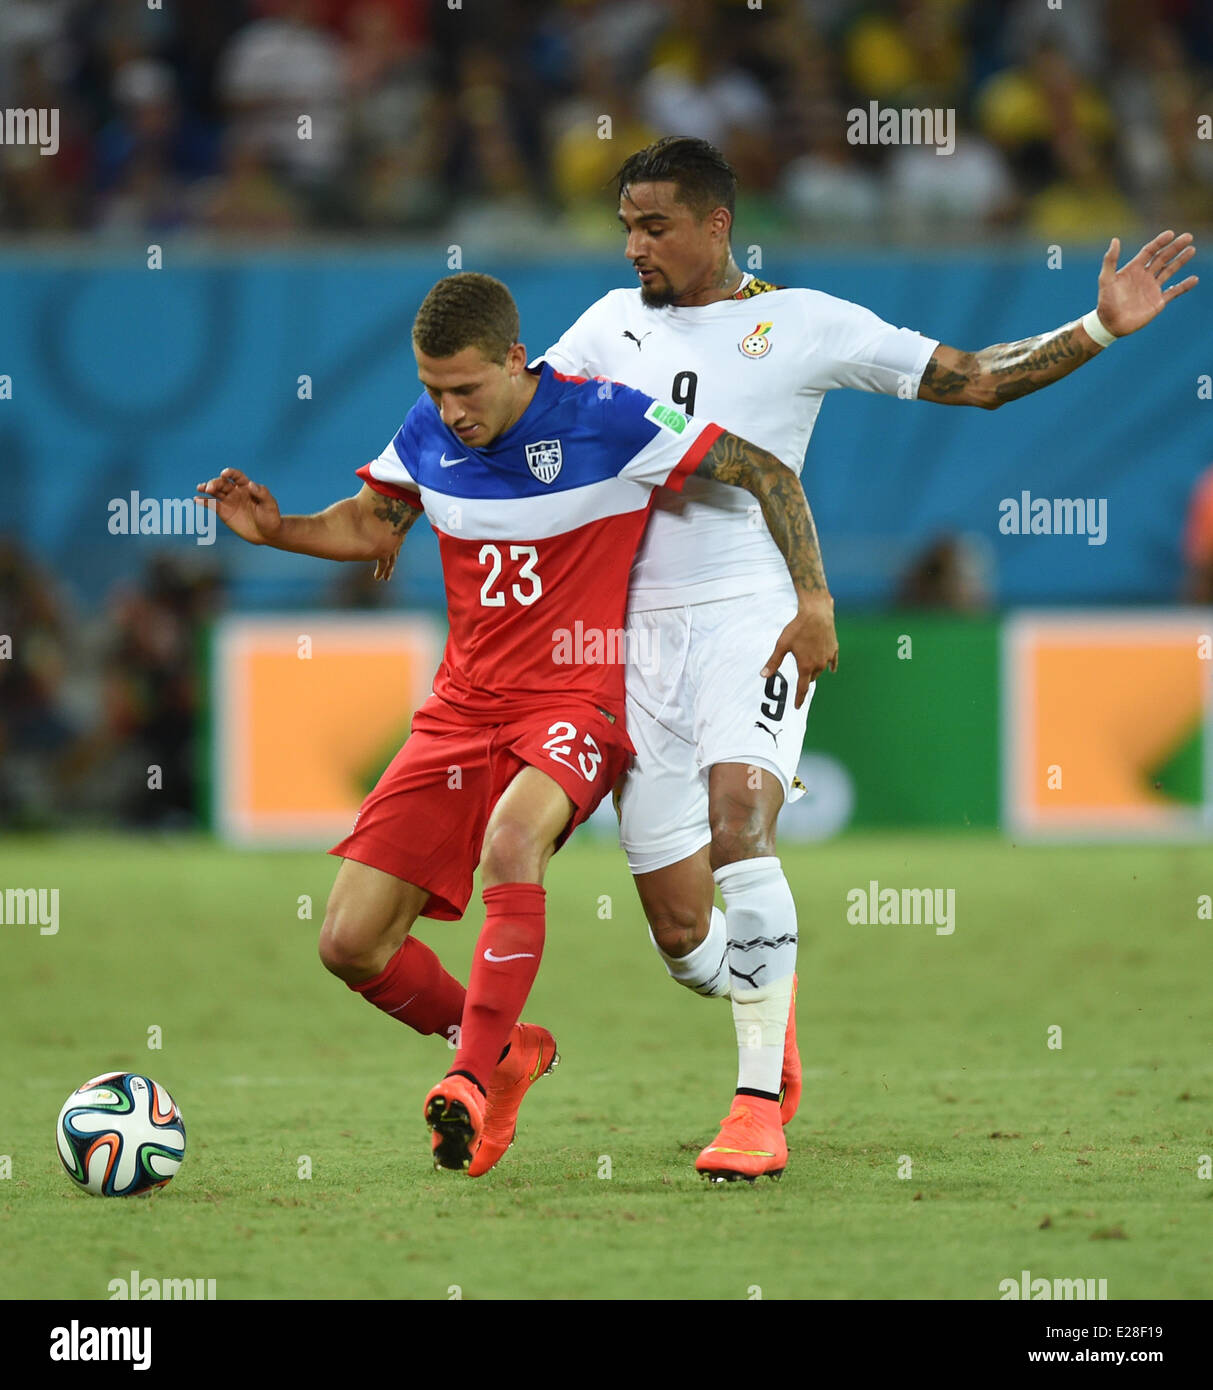 Natal, Brazil. 16th June, 2014. Fabian Johnson (L) of USA in action against Kevin Prince Boateng of Ghana during the FIFA World Cup 2014 group G preliminary round match between Ghana and the USA at the Estadio Arena das Dunas Stadium in Natal, Brazil, 16 June 2014. Credit:  dpa picture alliance/Alamy Live News Stock Photo